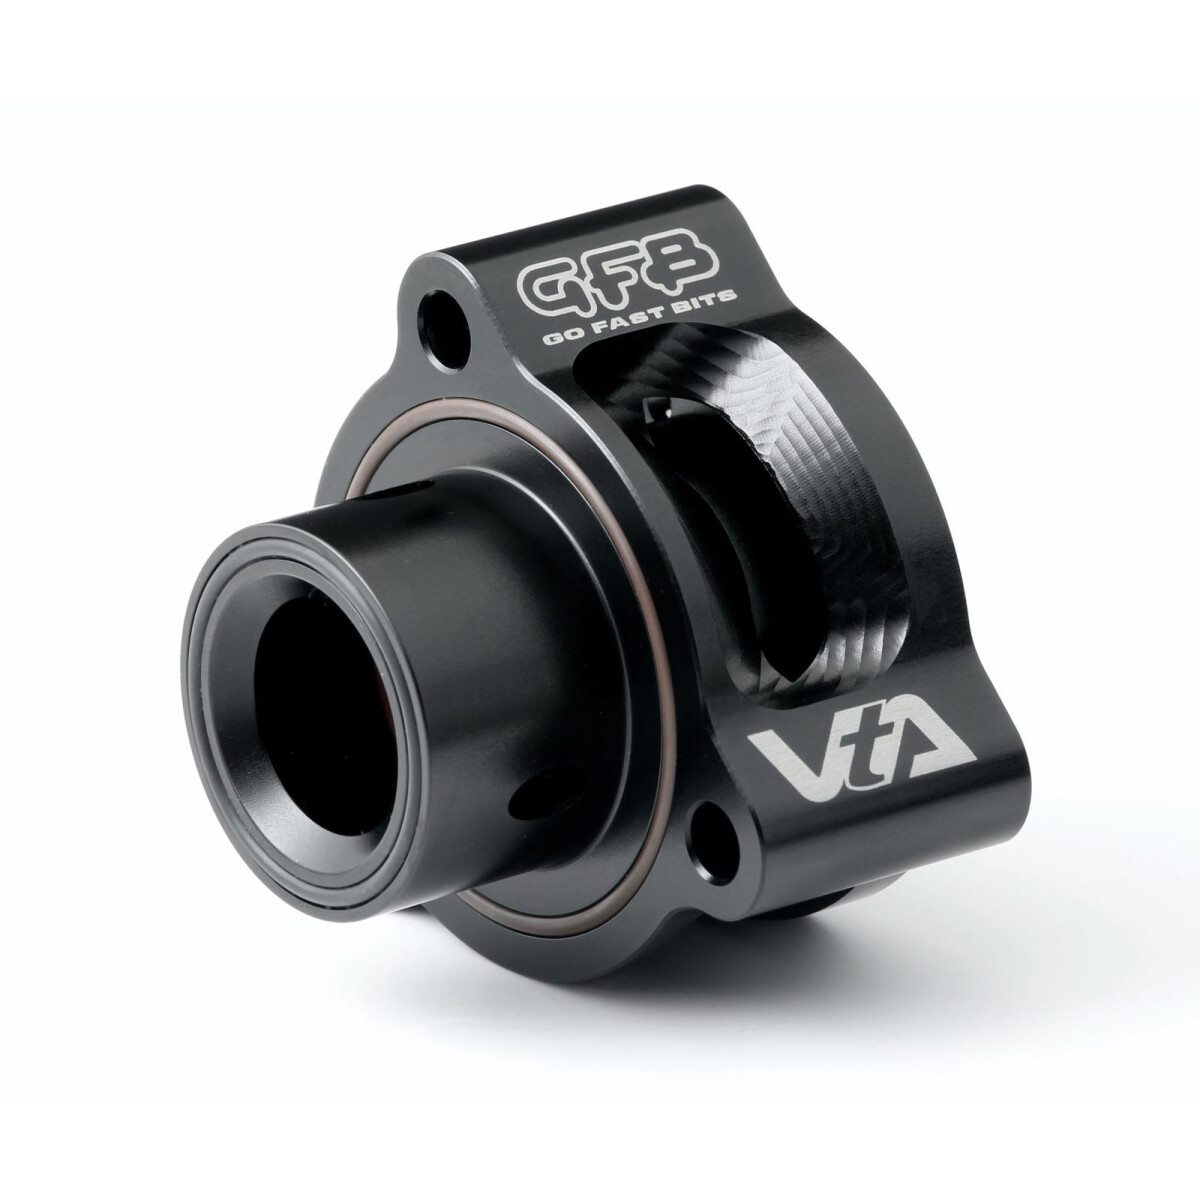 GFB VTA T9451 Blow Off Valve for VAG 2.0, 2.5, 1.8 and several 1.4 TFSI